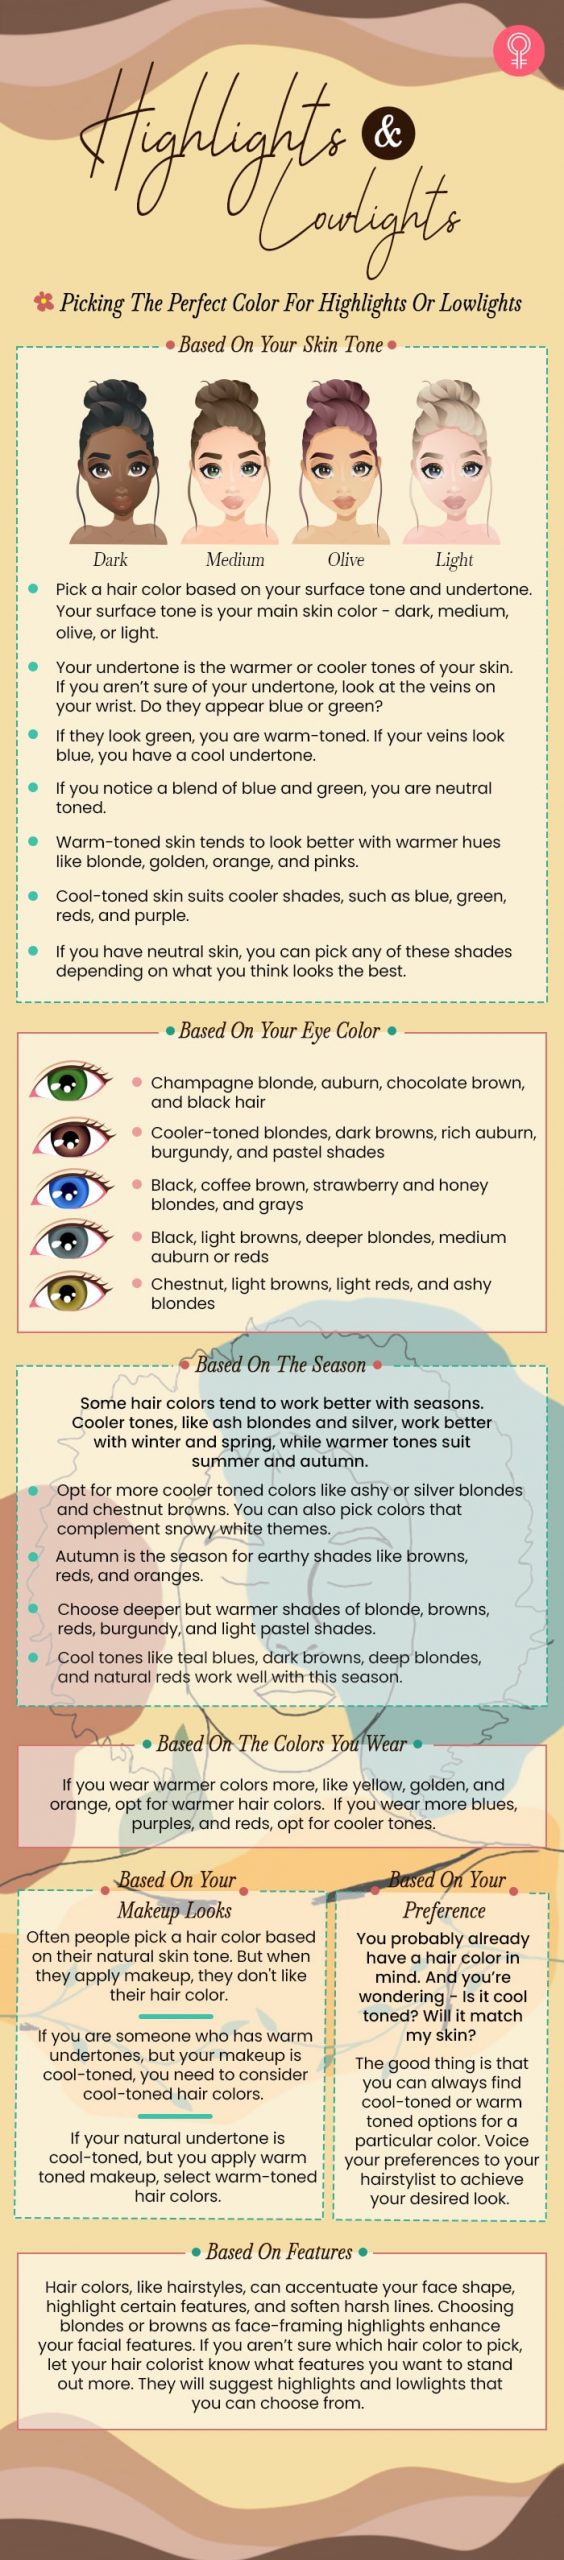 how to pick the perfect color for highlights or lowlights [infographic]